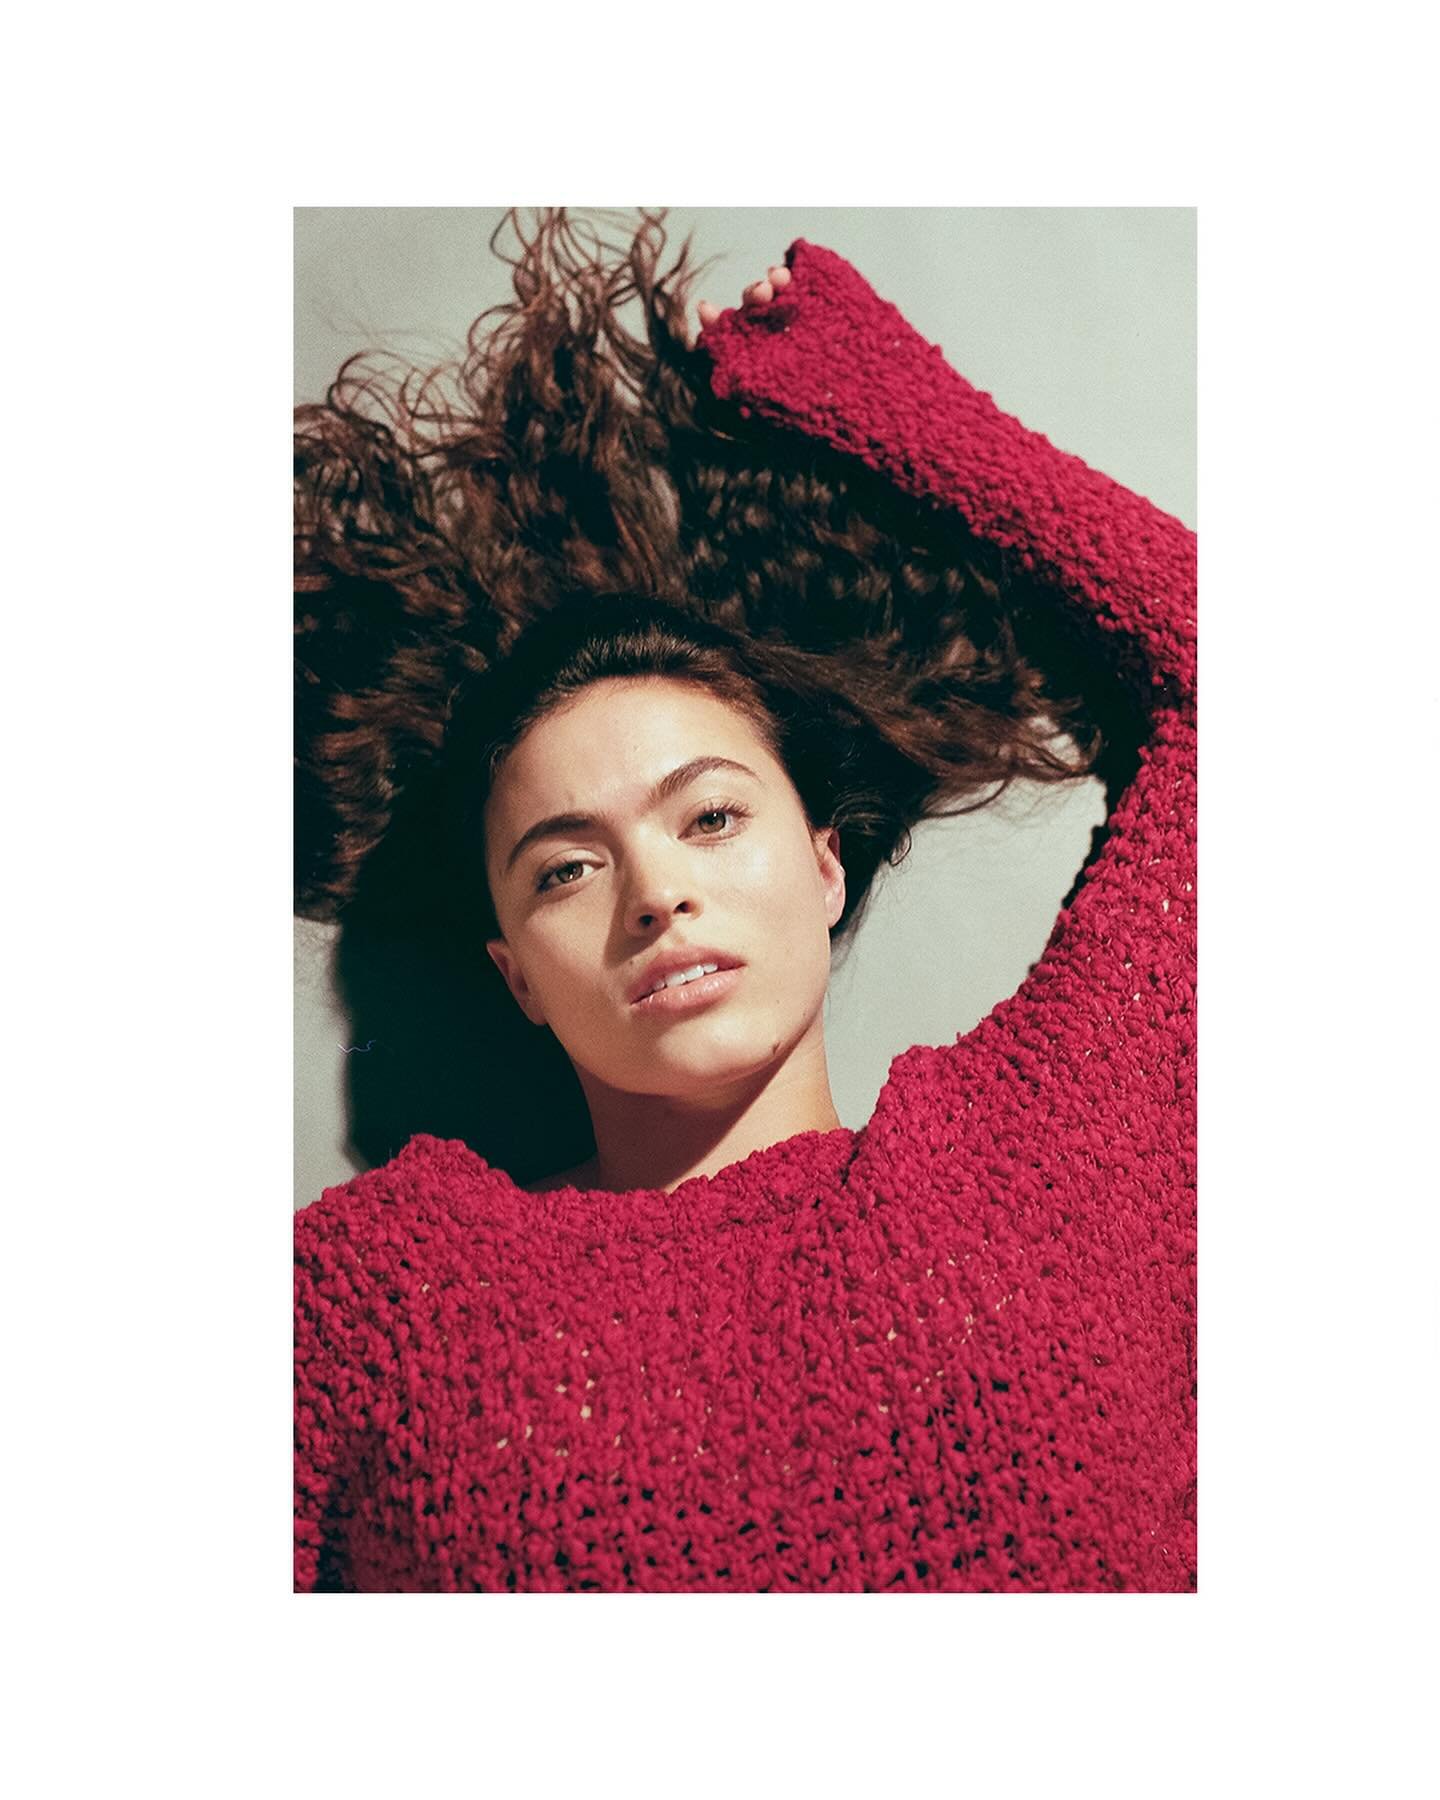 All red everything with @graceann_nader for @fordmodels 

#redsweater #fordmodels #modeltest #35mmfilm #polaroid #polaroids #expiredfilm #polaroid669 #polaroidtype55 #type55 #nikon #nadersisters #graceannnader #editorialphotography #largeformat #4x5f